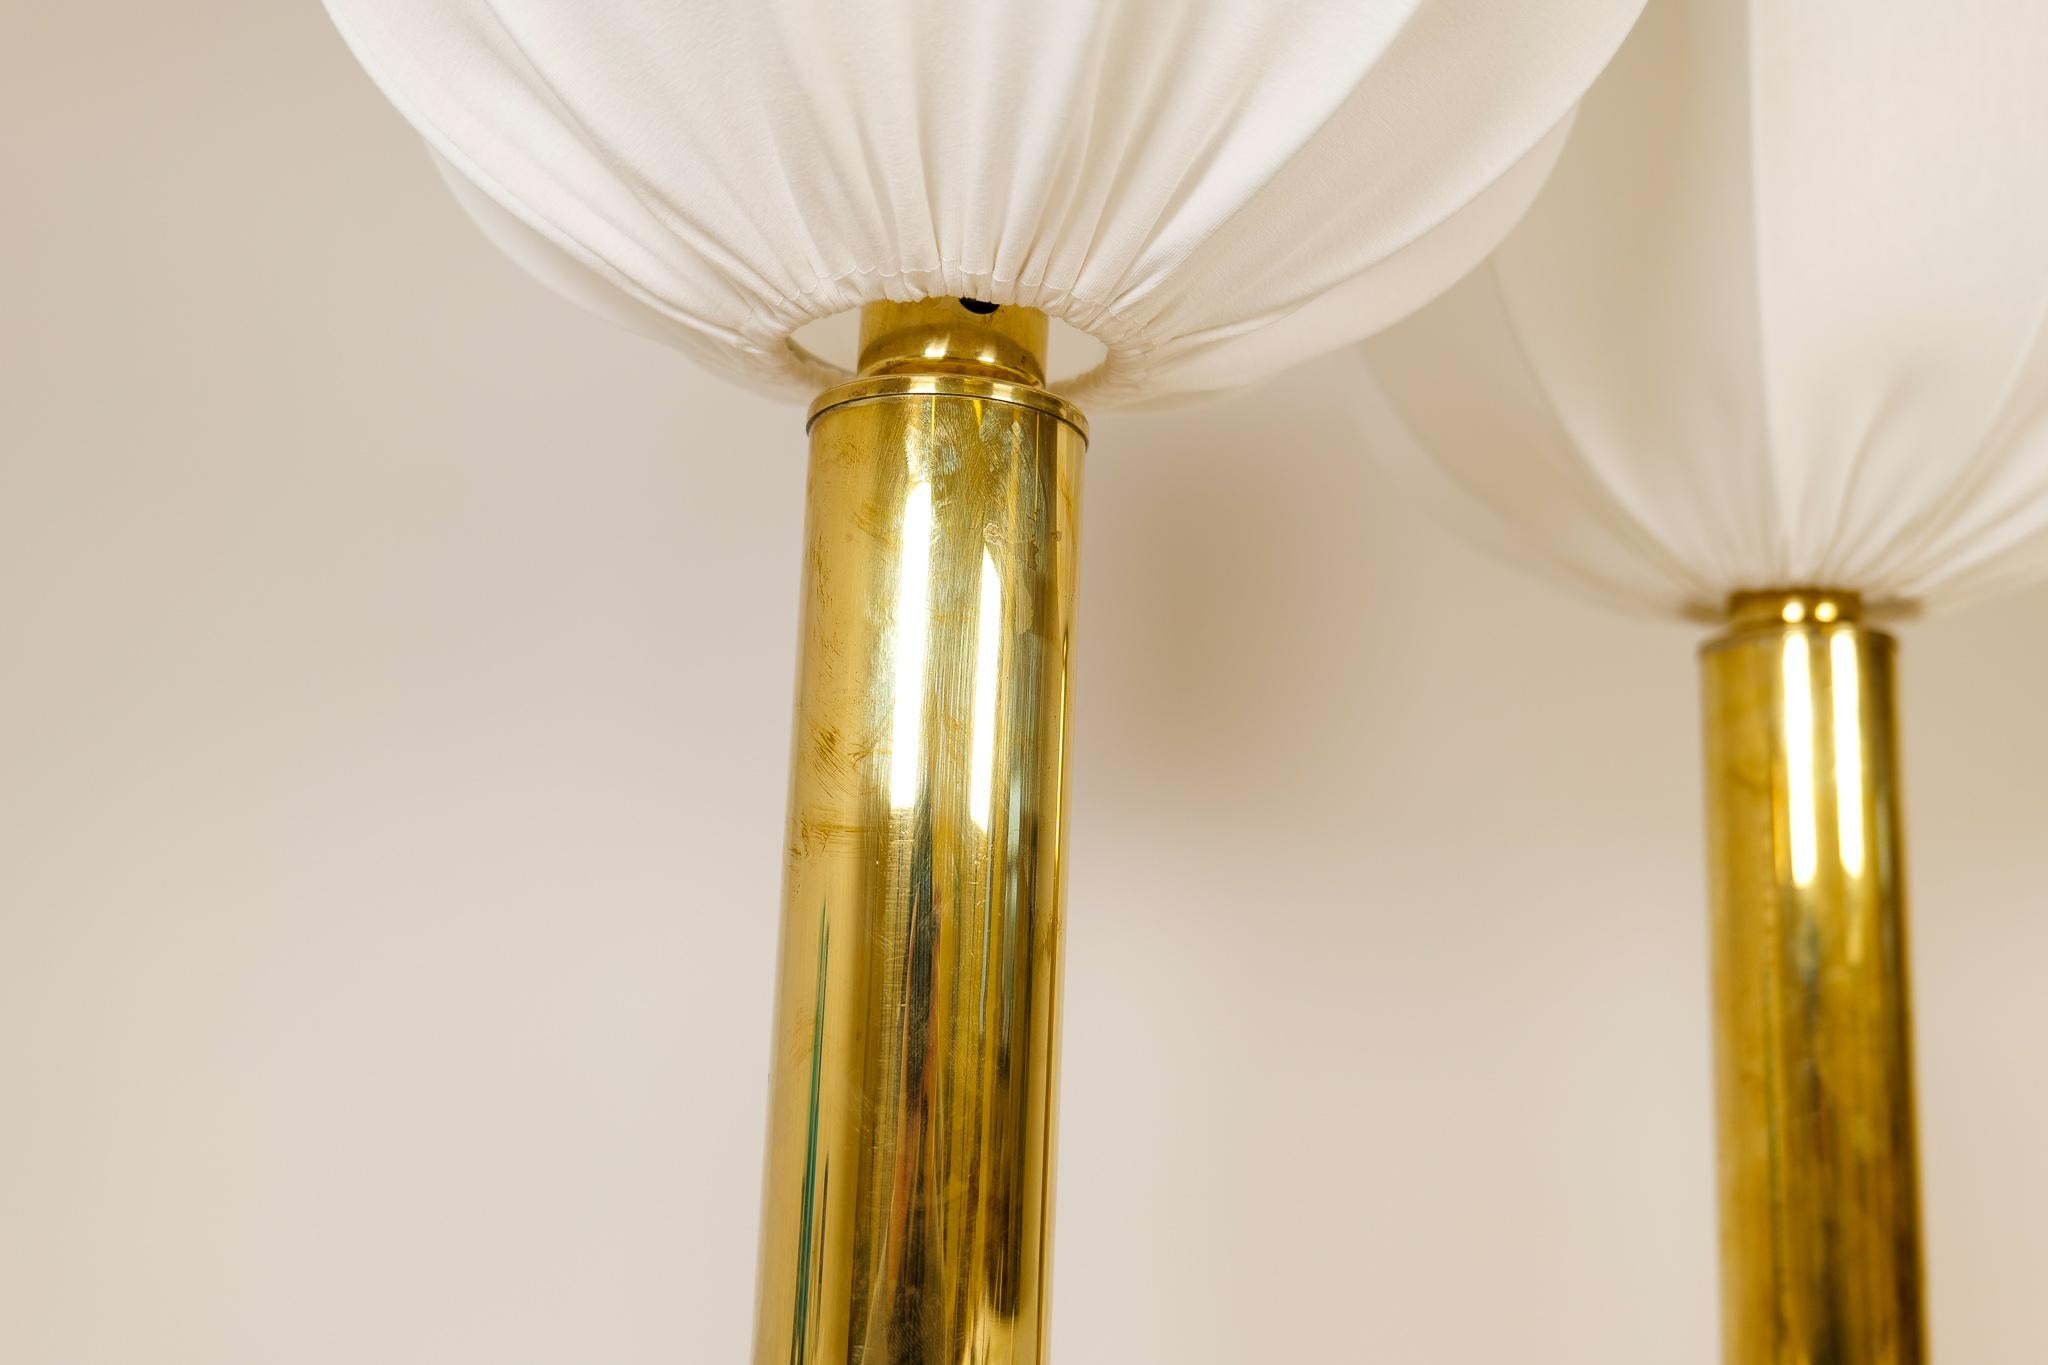 Midcentury Pair of Brass Table Lamps by Kosta Elarmatur, Sweden, 1960s For Sale 5